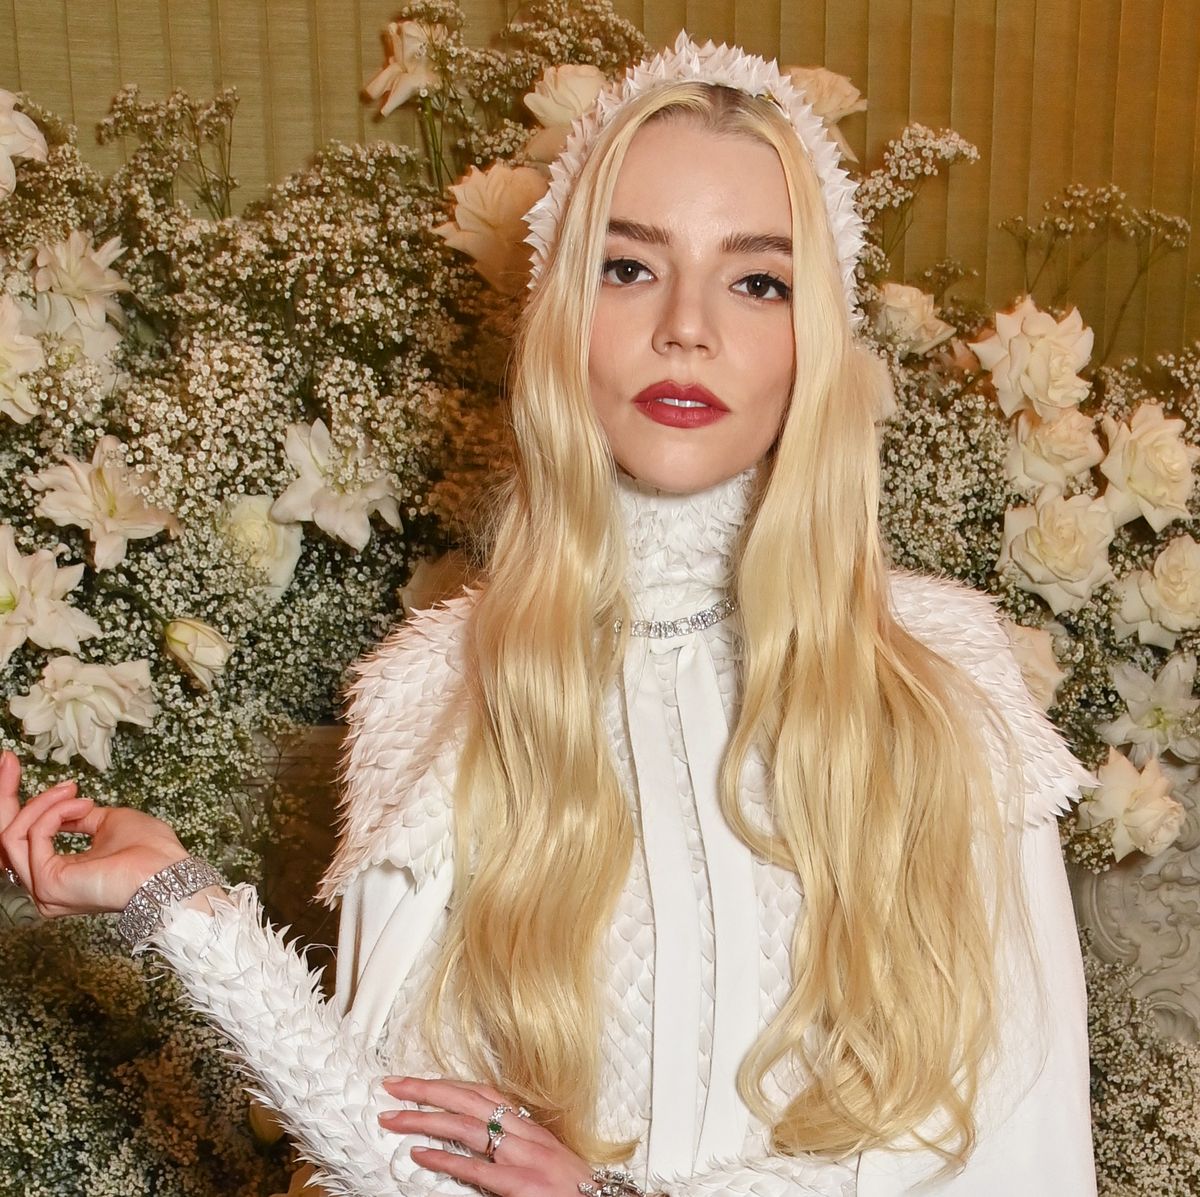 All the details on Anya Taylor-Joy's unconventional wedding dress